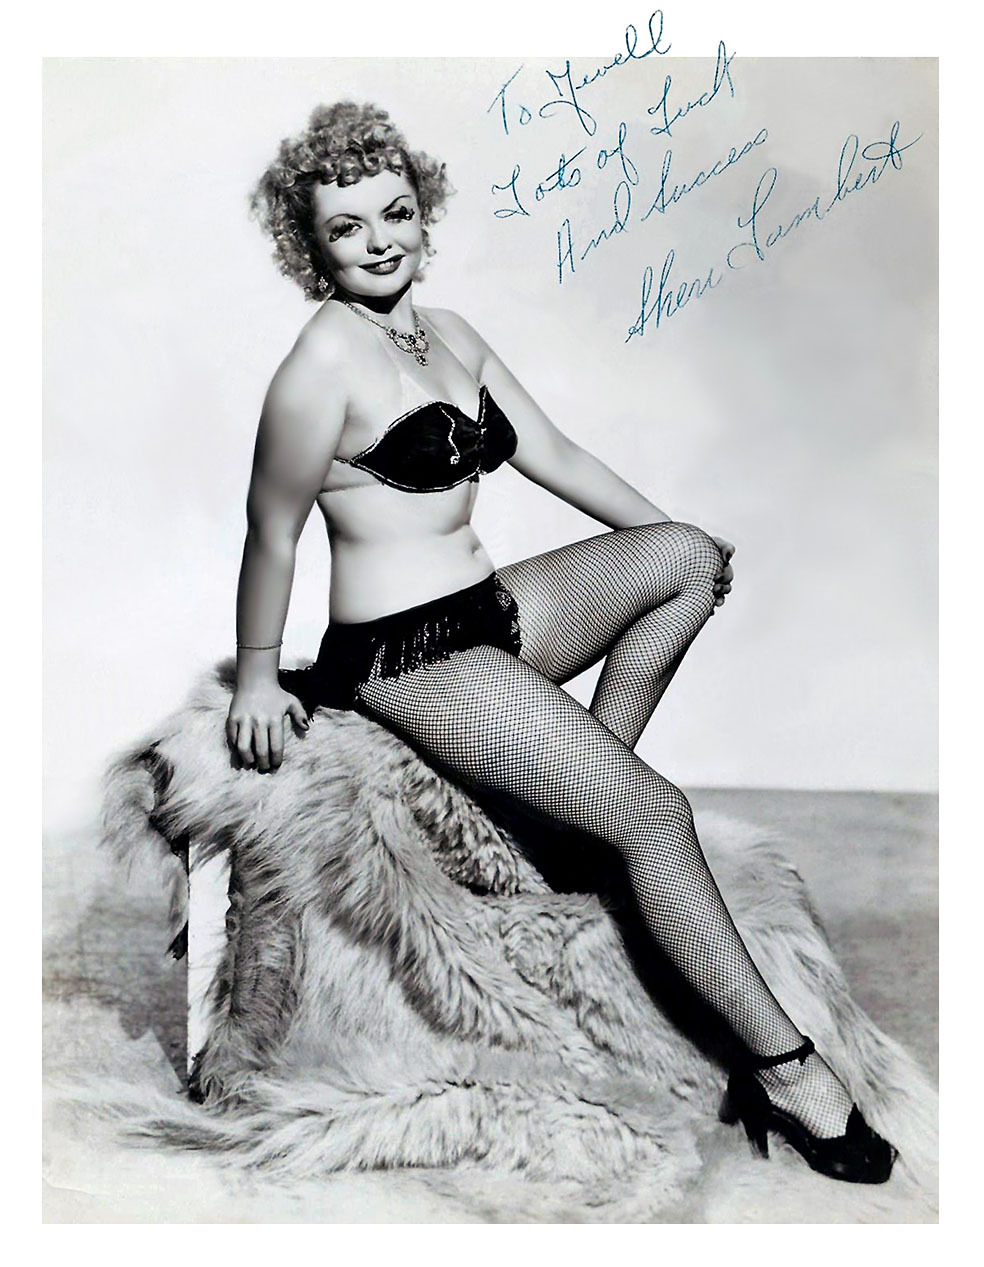 Sheri LambertVintage promo photo personalized:  “To Jewell — Lots of Luck And